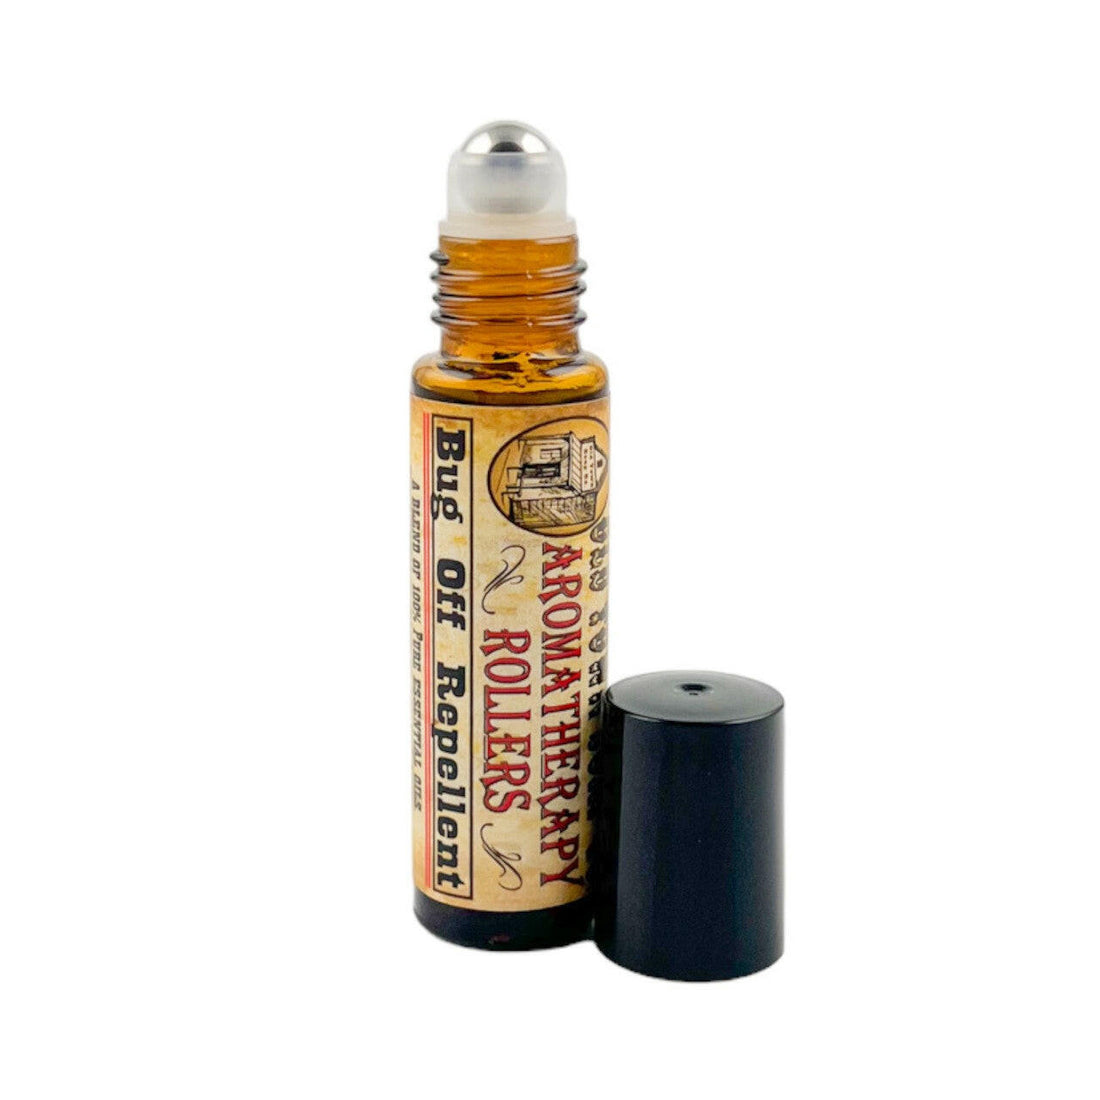 Bug Off Essential Oil Rollers - Old Town Soap Co.